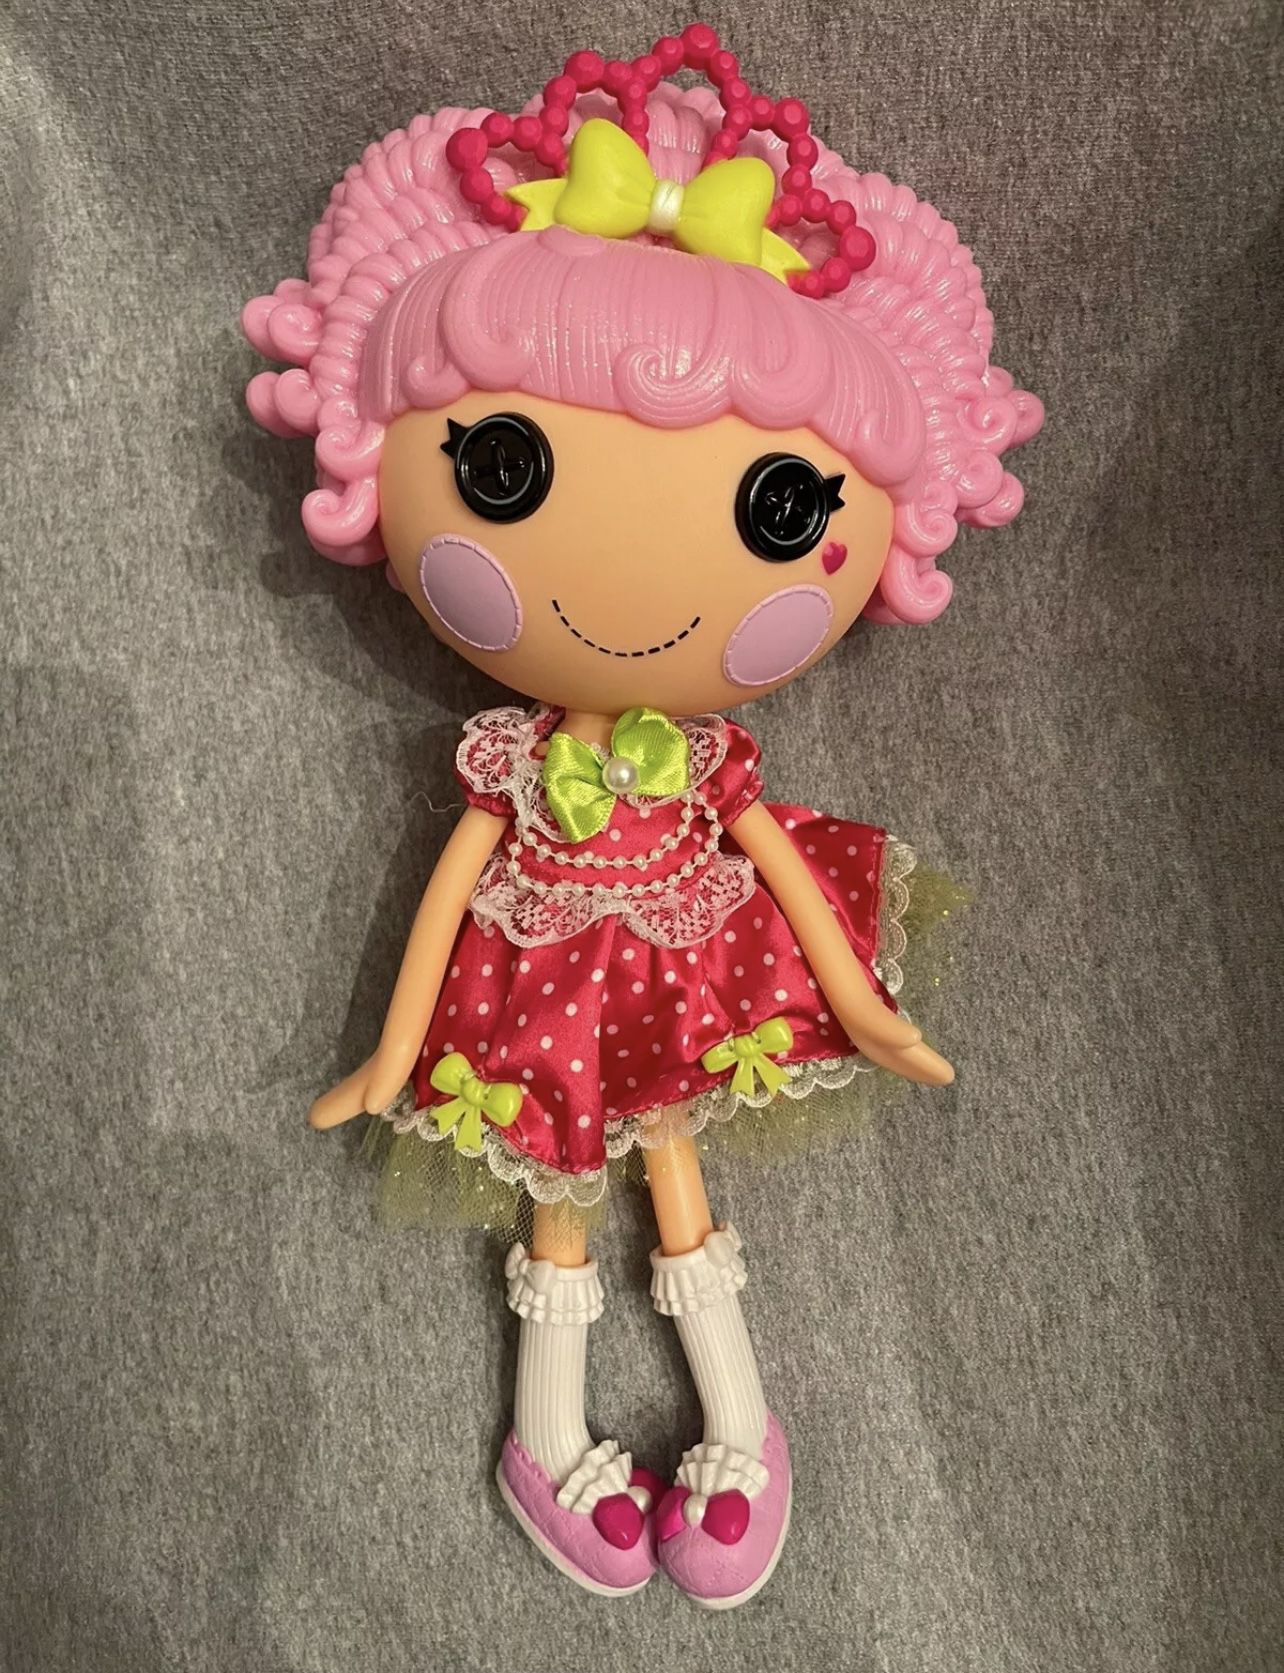 Lalaloopsy Super Silly Party Doll, Toy